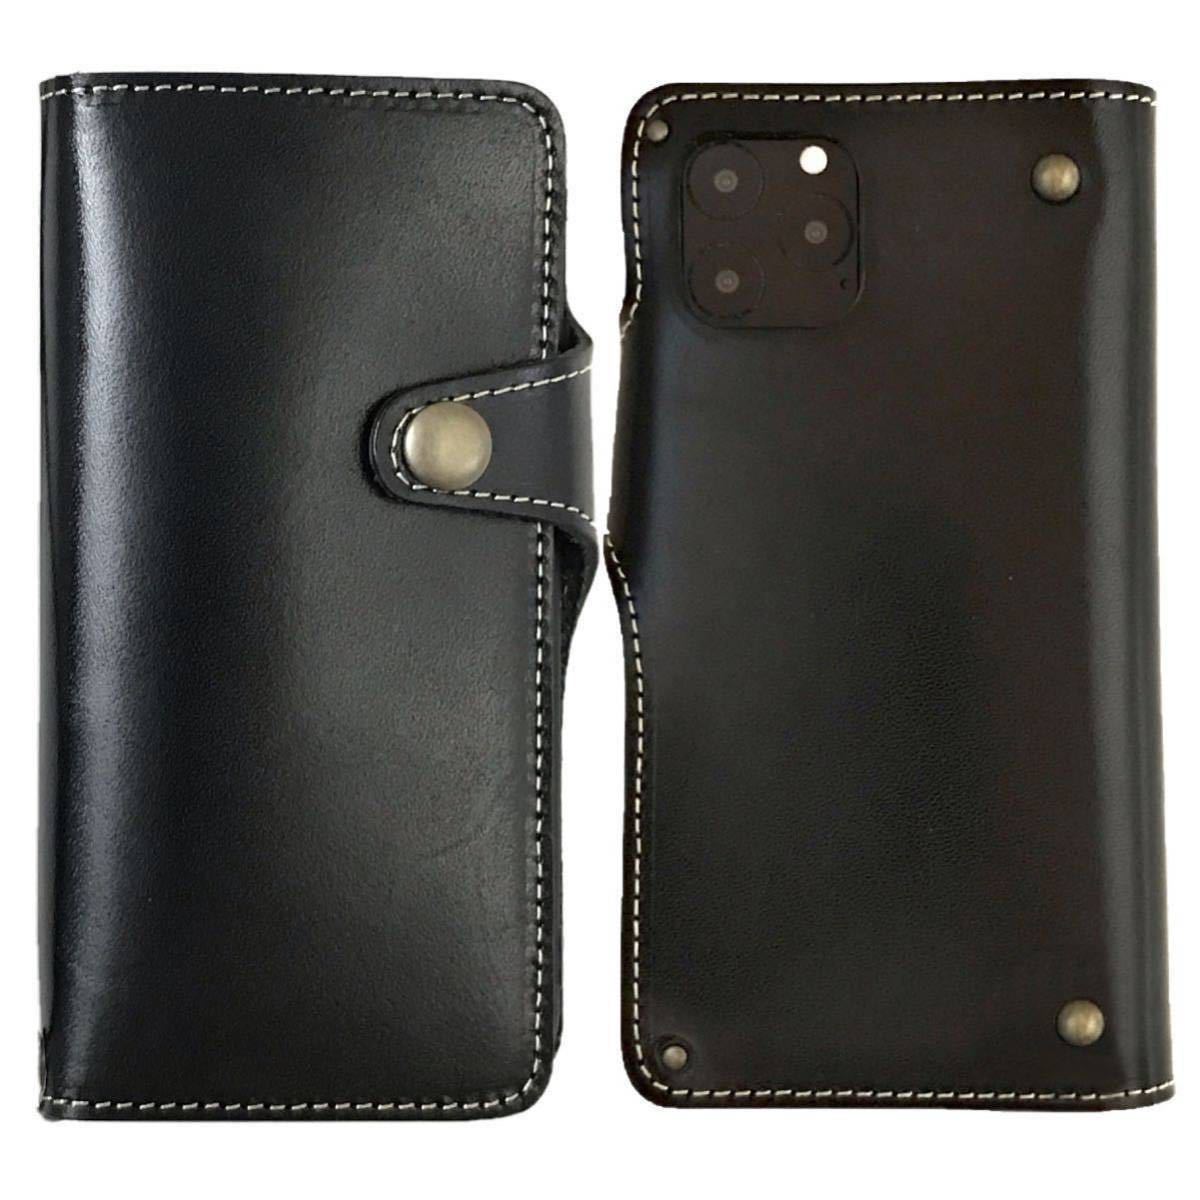 * Tochigi leather iPhone14 Plus cow leather smartphone case notebook type cover original leather leather black made in Japan vo- Noah two wheels *